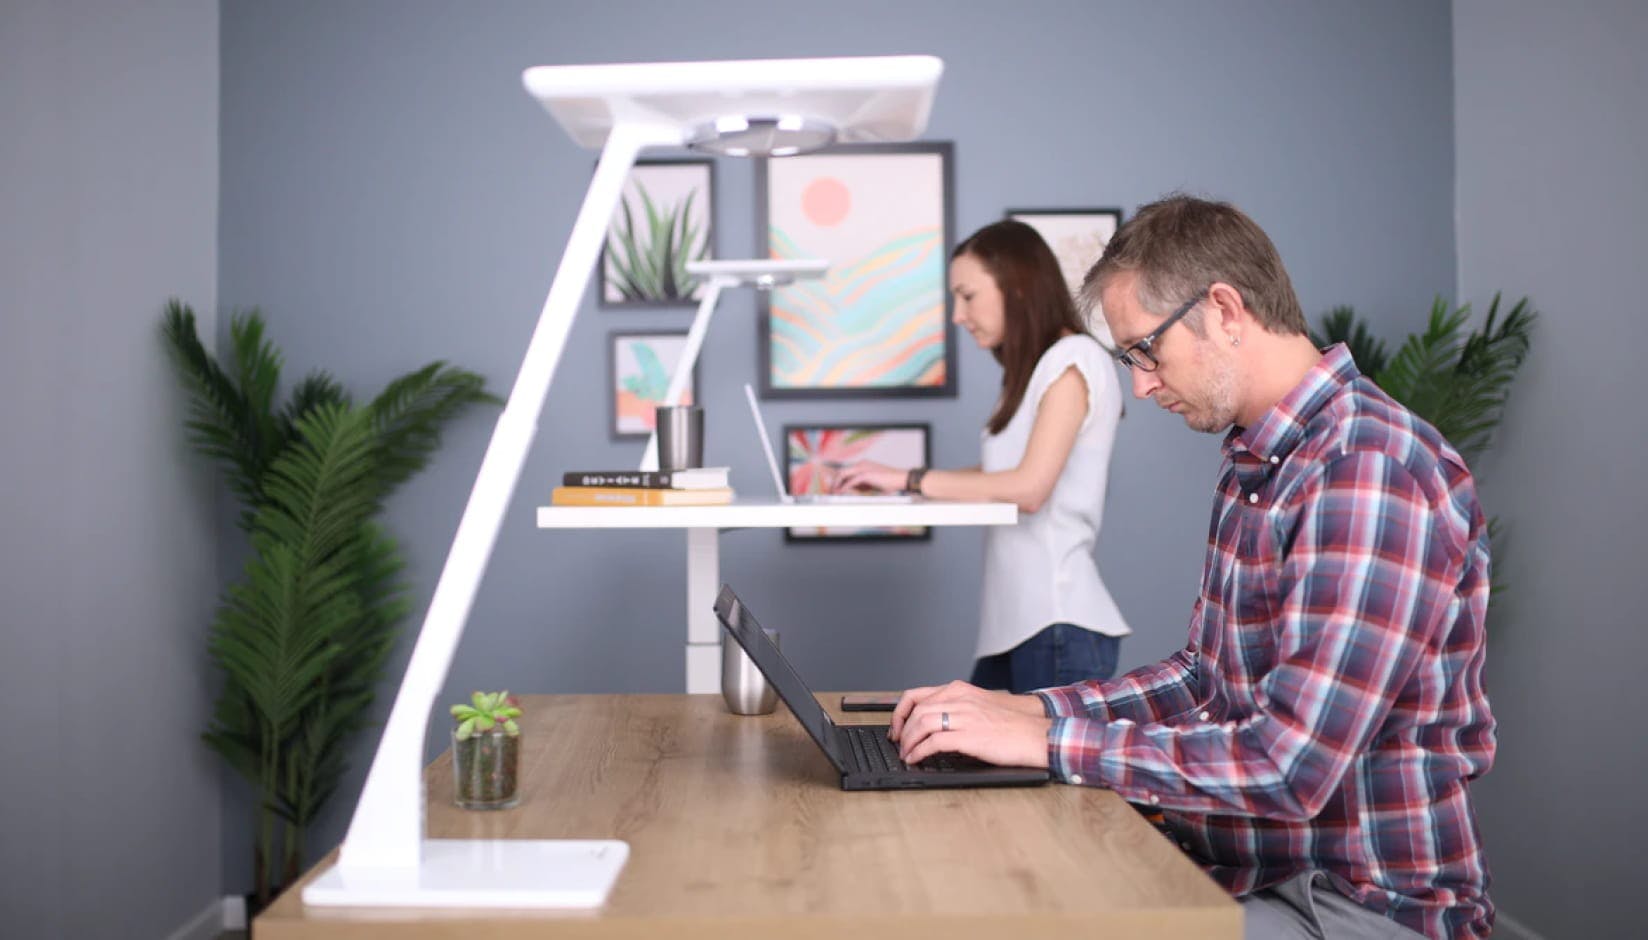 Members working at the desks at a coworking space